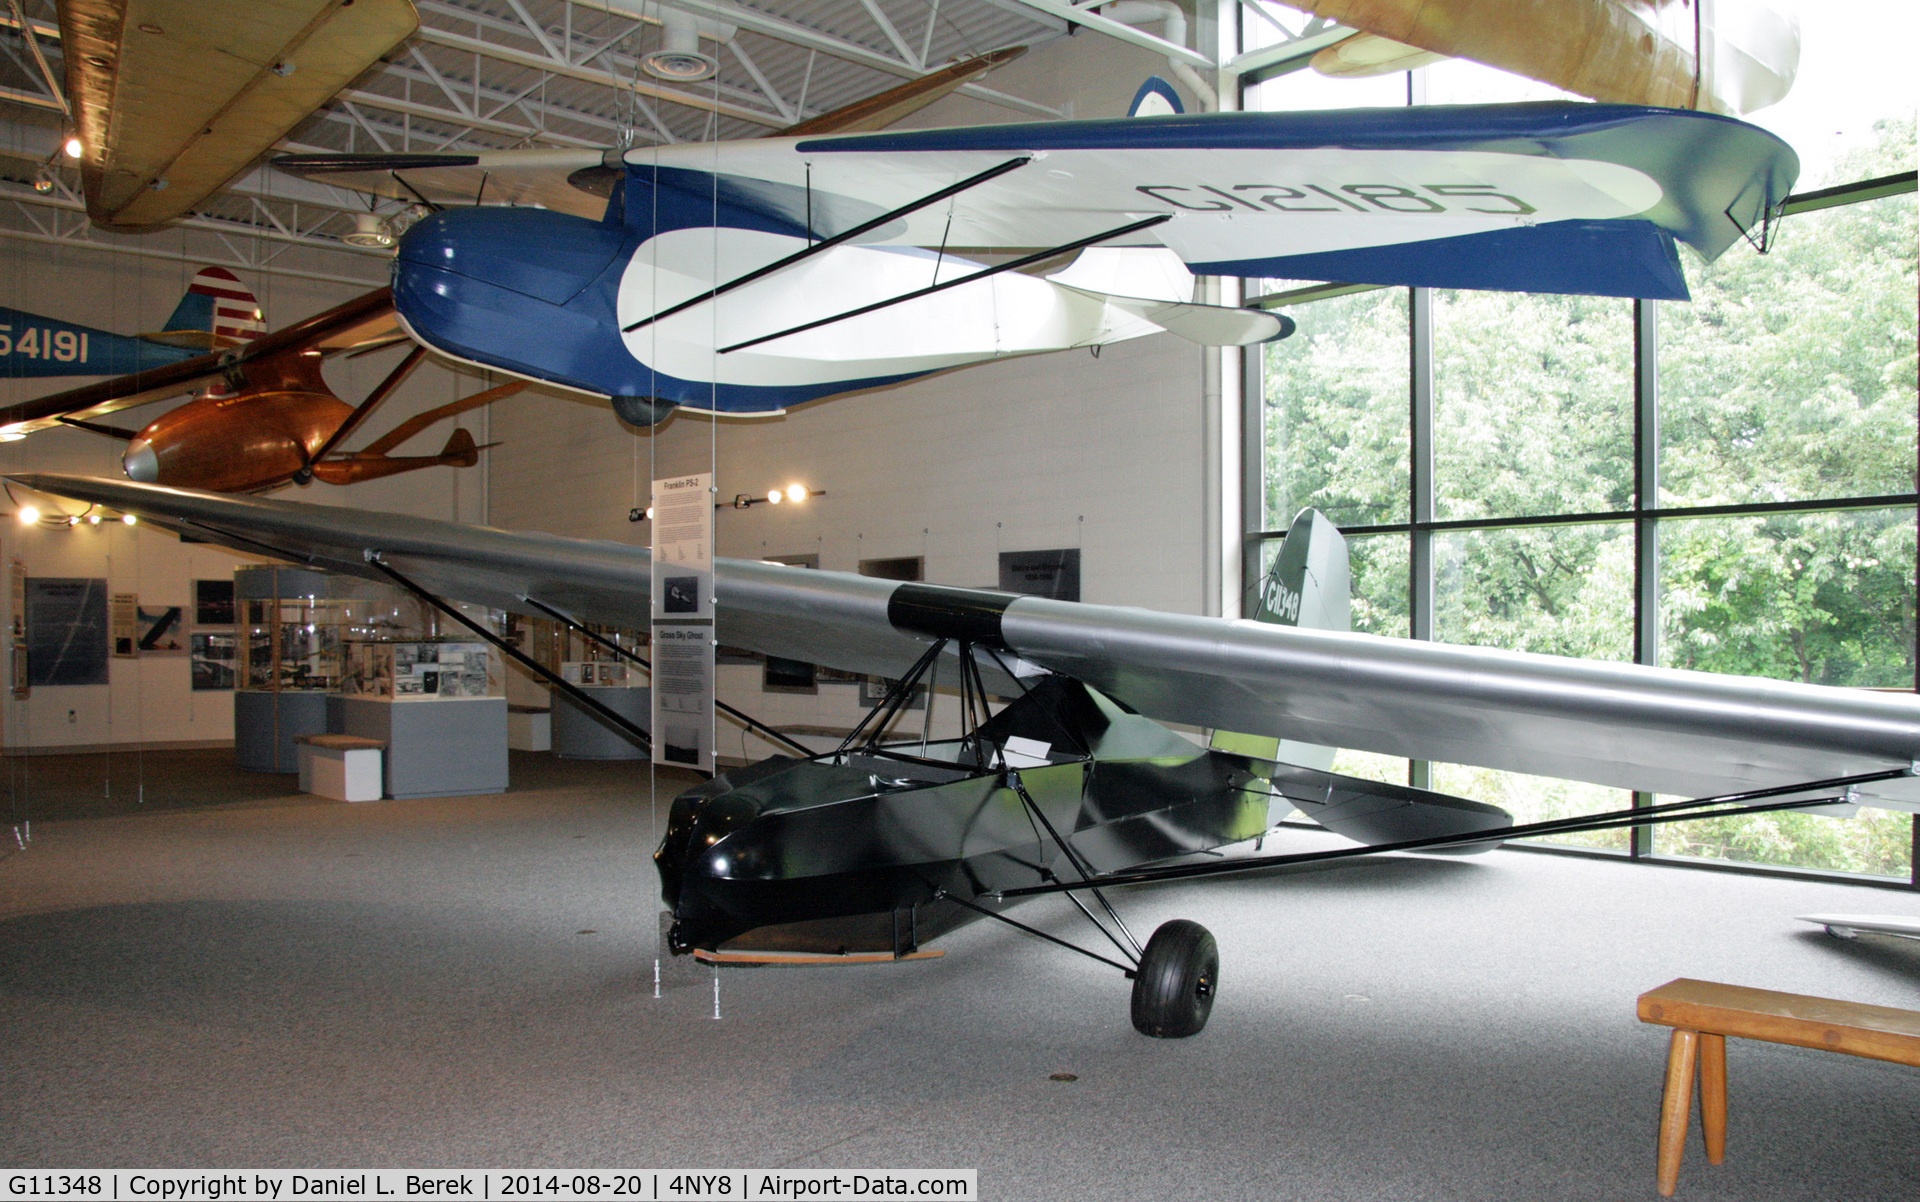 G11348, Gross Sky Ghost C/N 0000, This aircraft is part of the extensive collection at the National Soaring Museum.